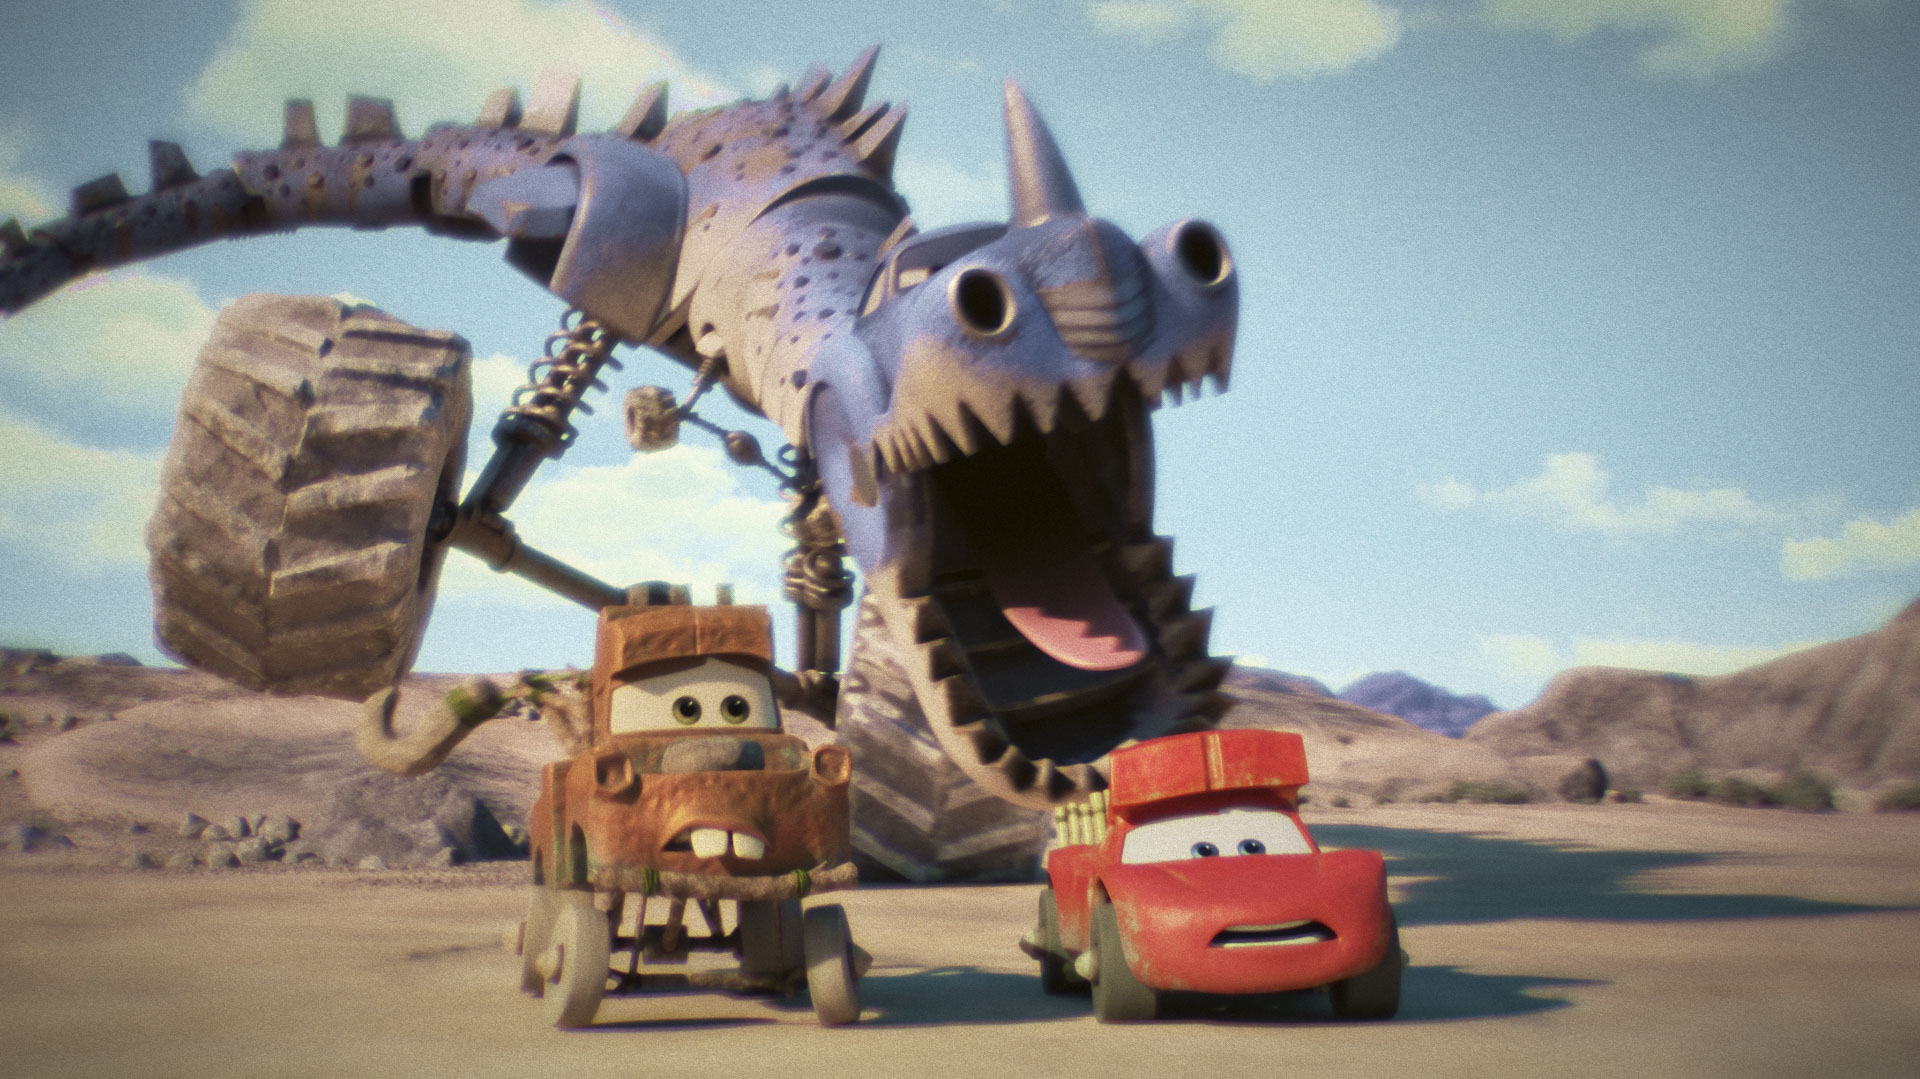 Celebrate Lightning McQueen Day and Get Sneak Peek at "Cars on the Road" #DisneyPlus #CarsOnTheRoad